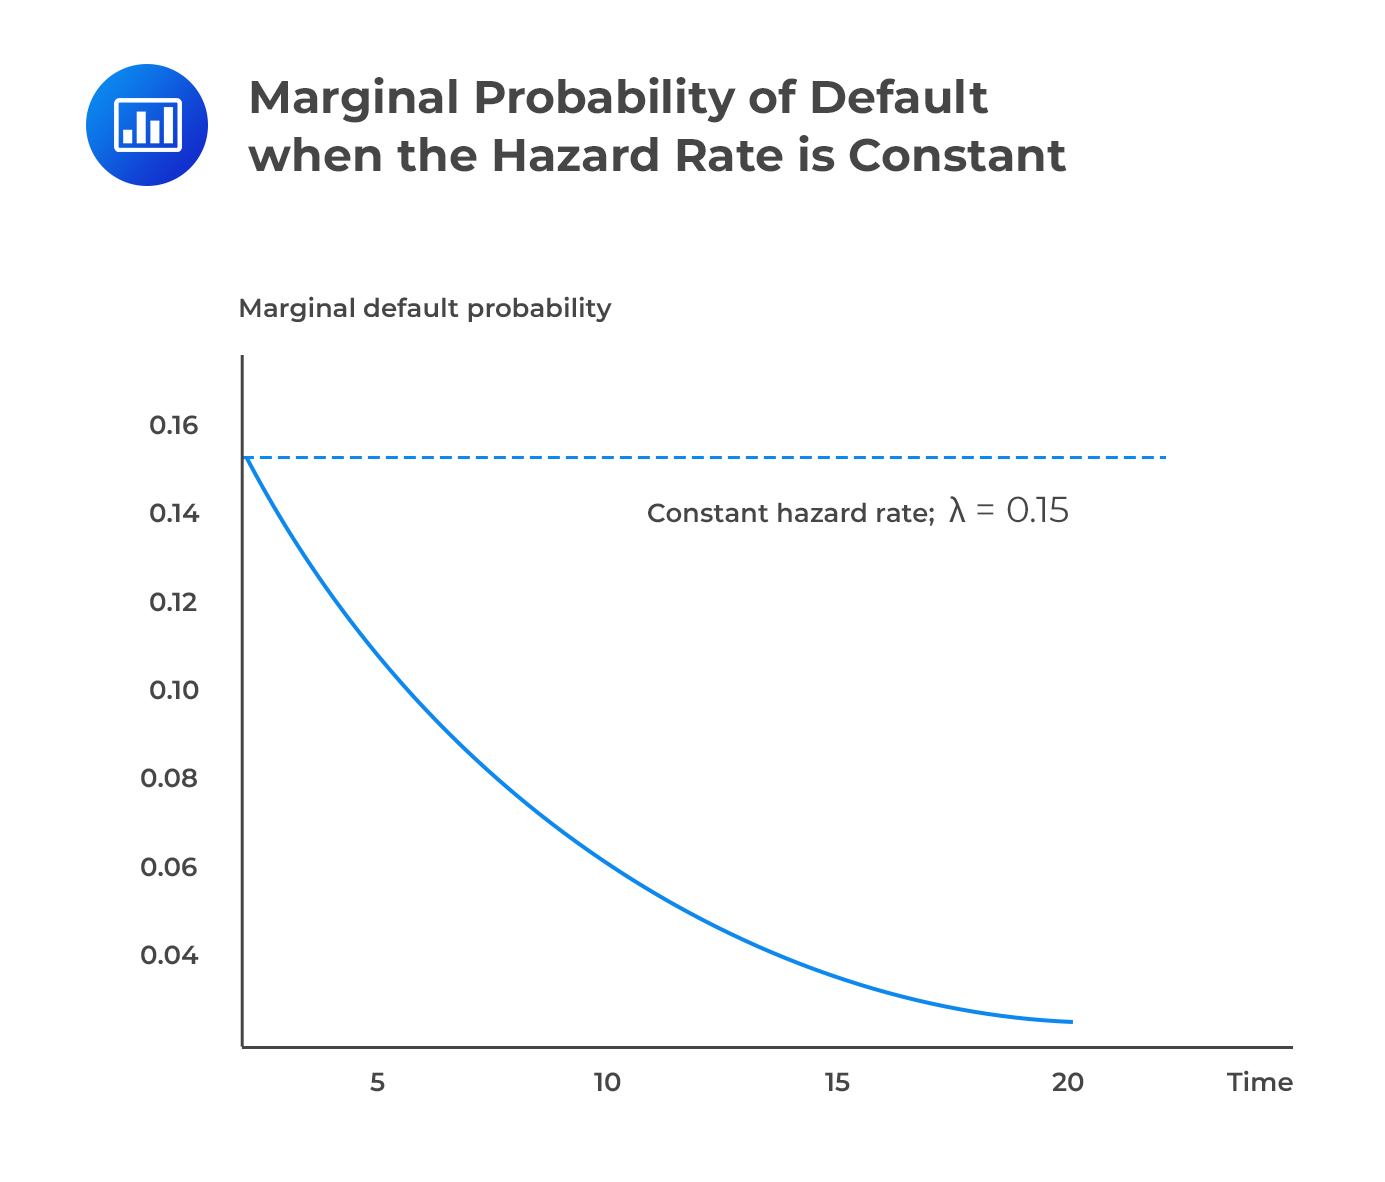 Marginal Probability of Default when the Hazard Rate is Constant